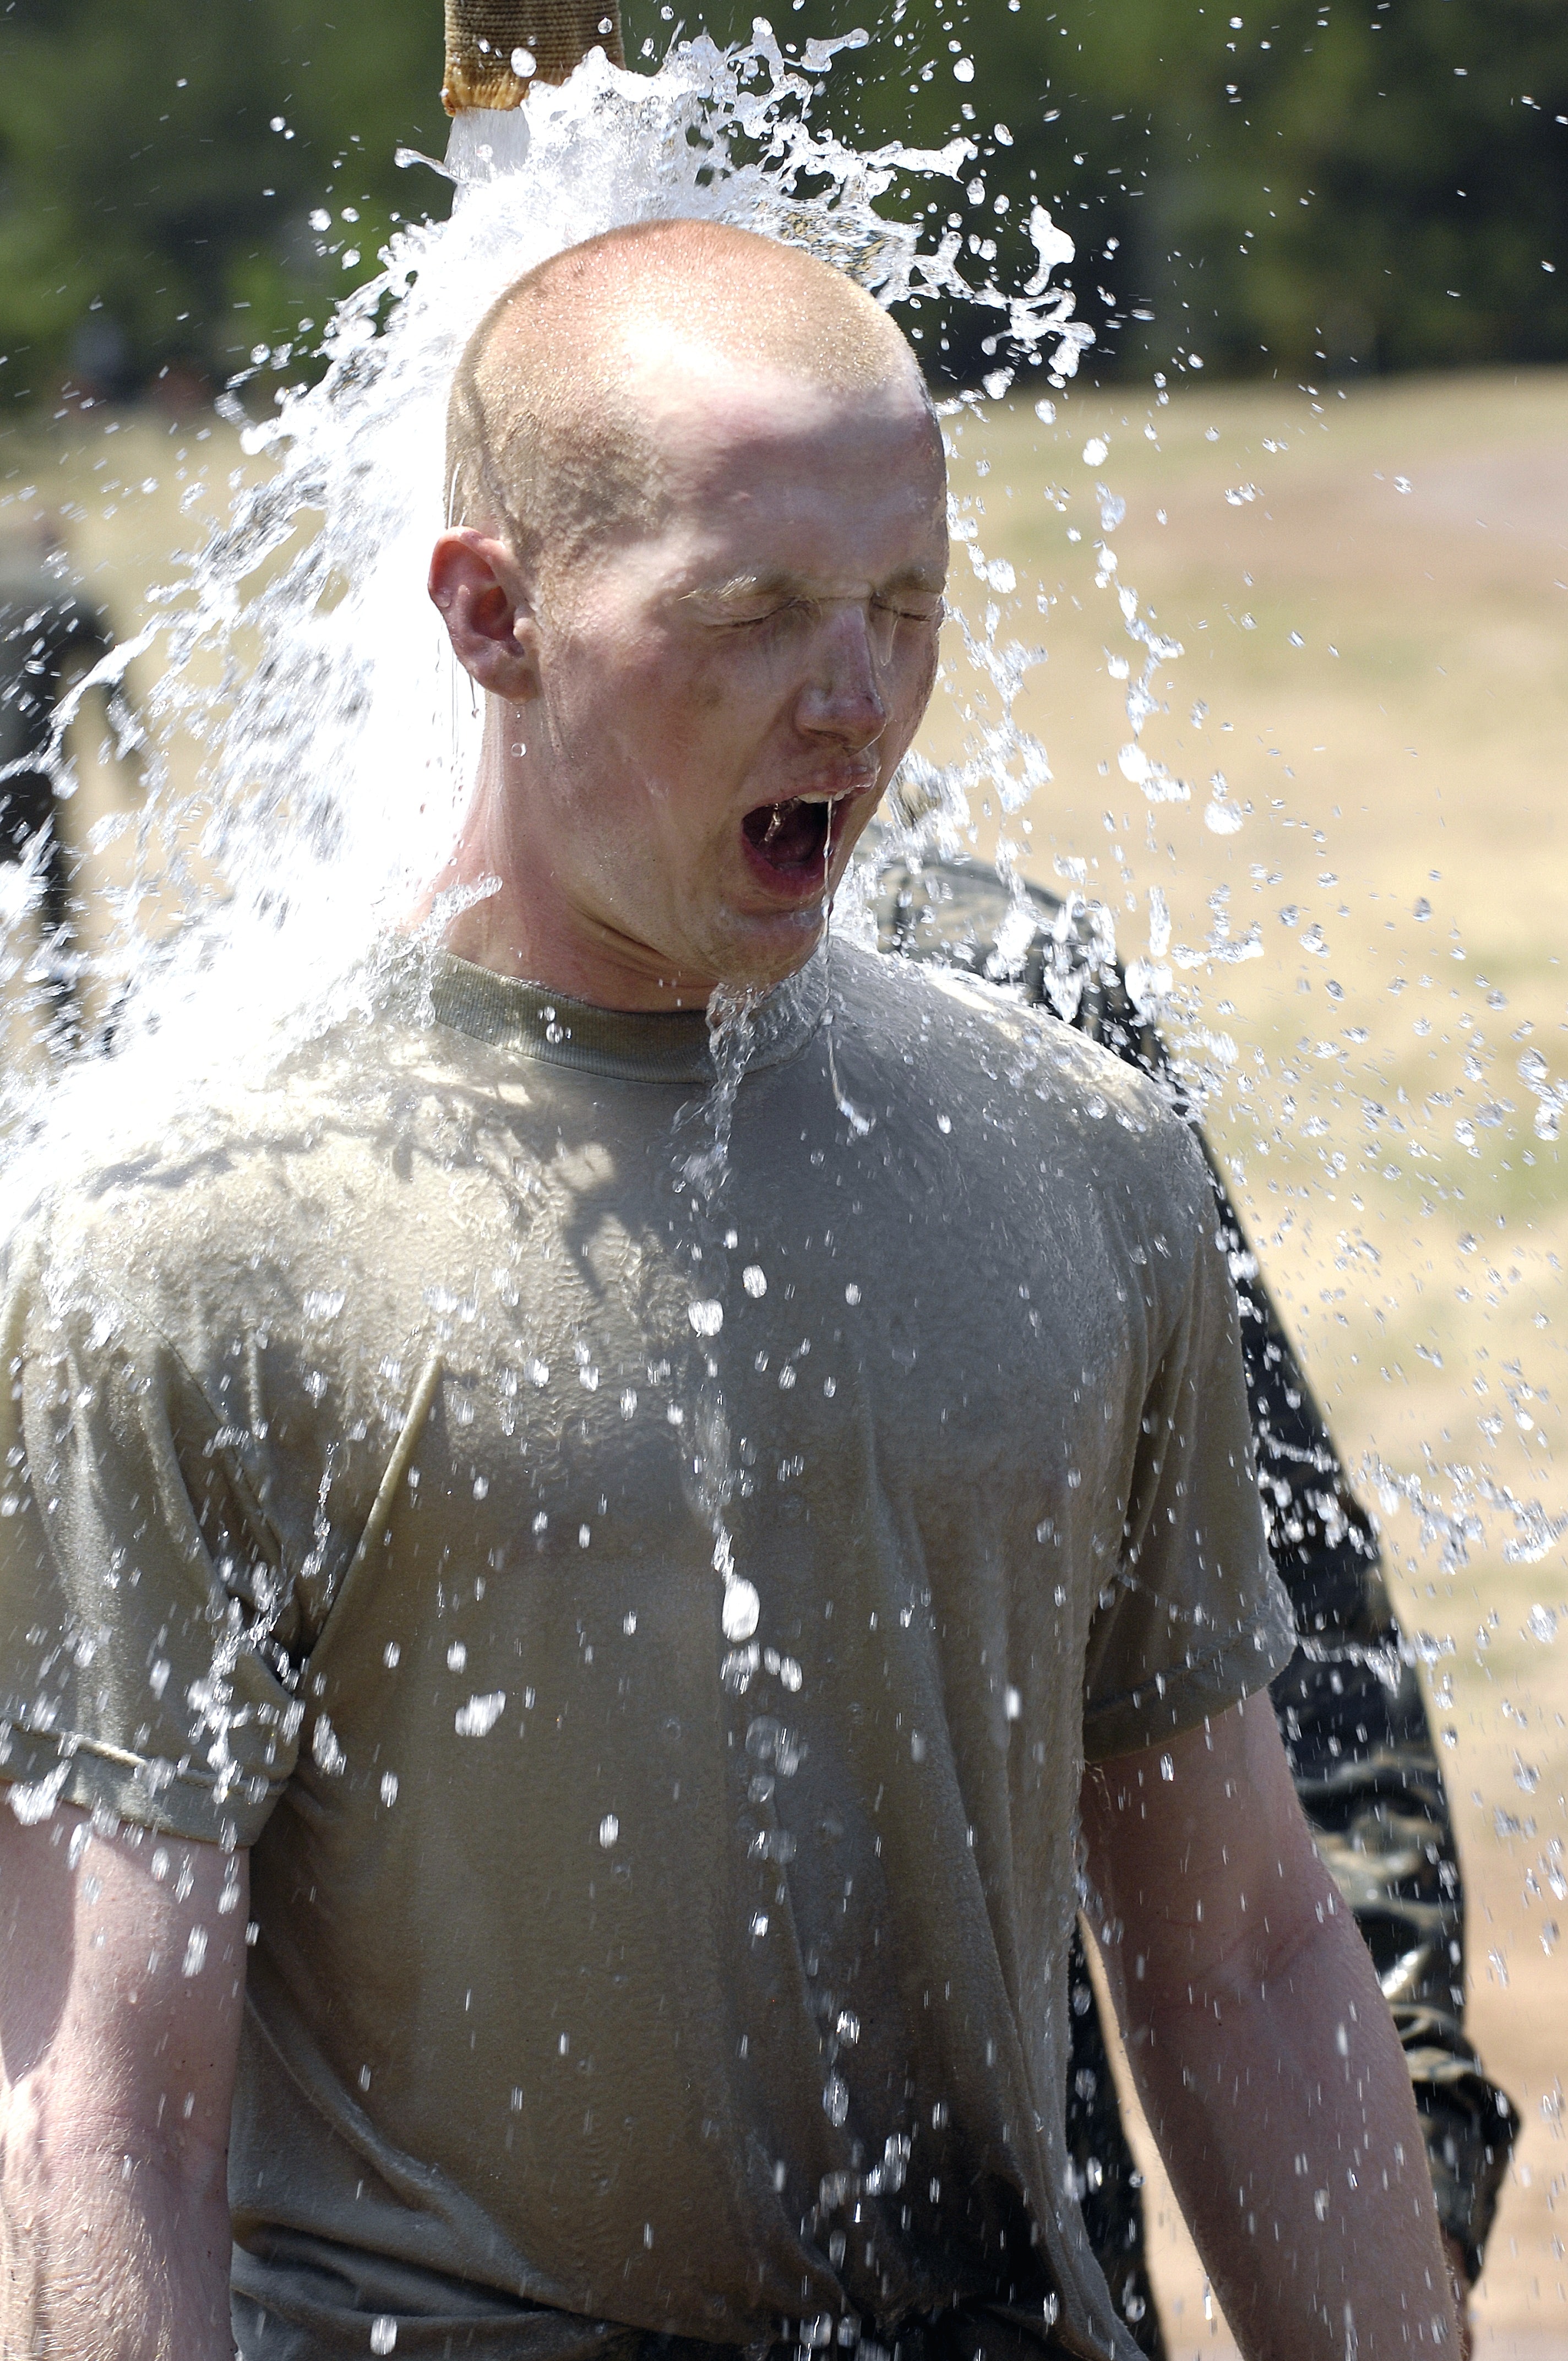 military trainee got bathed with fire hose